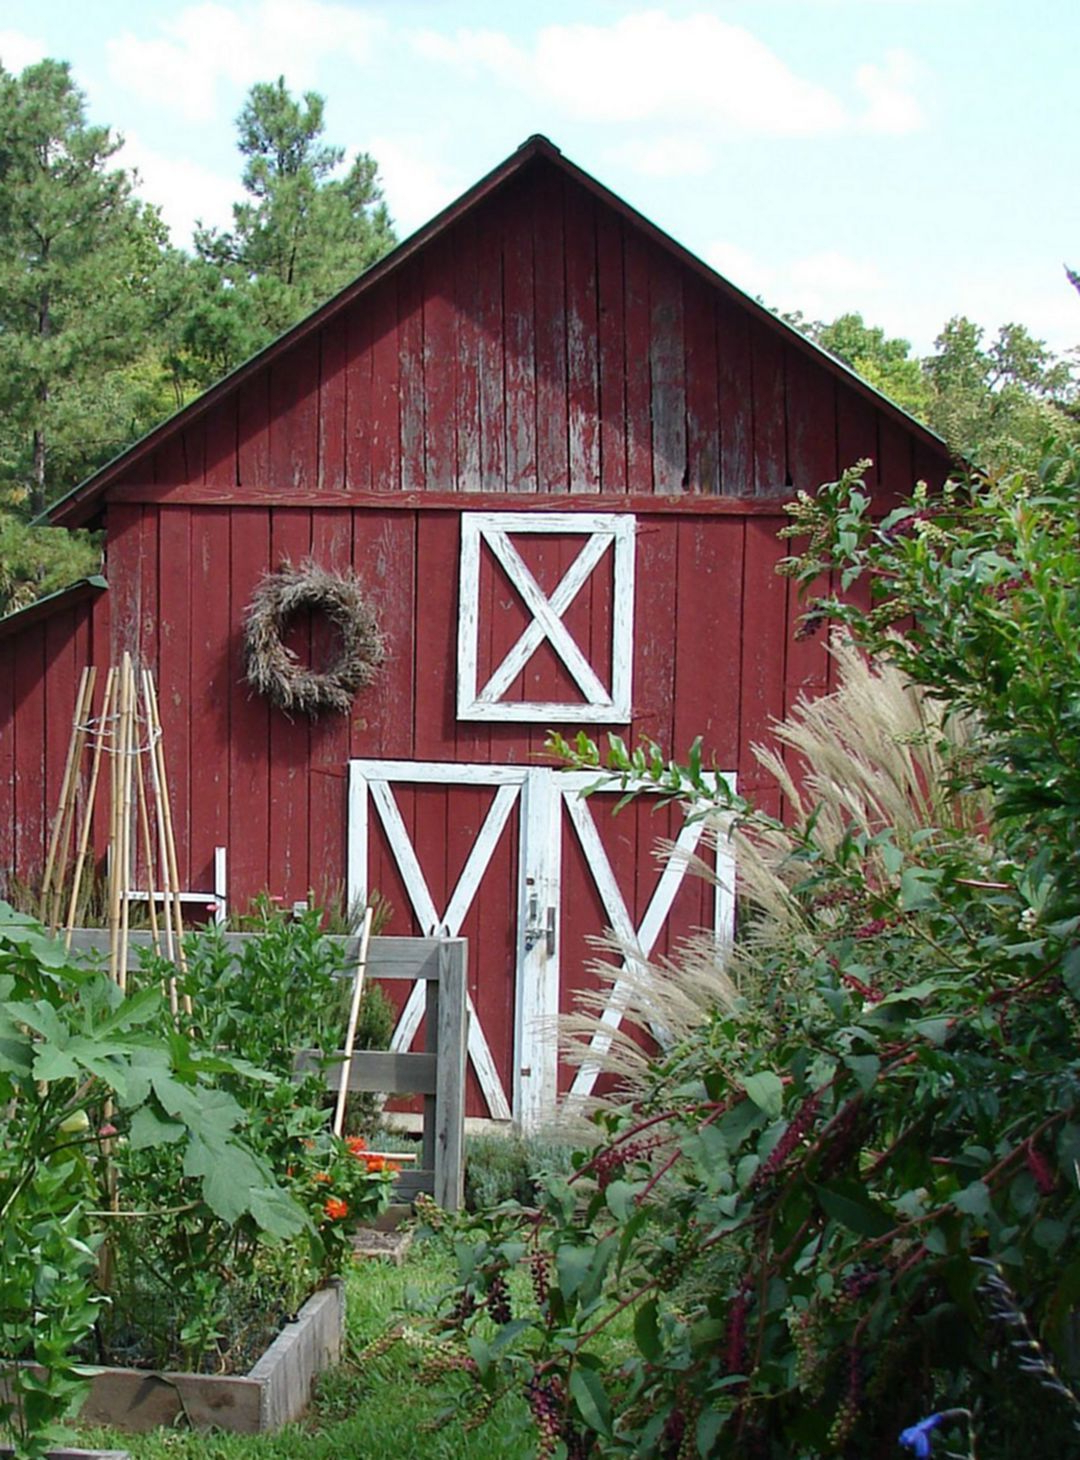 30 Fantastic Red Barn Building Ideas For Inspire You